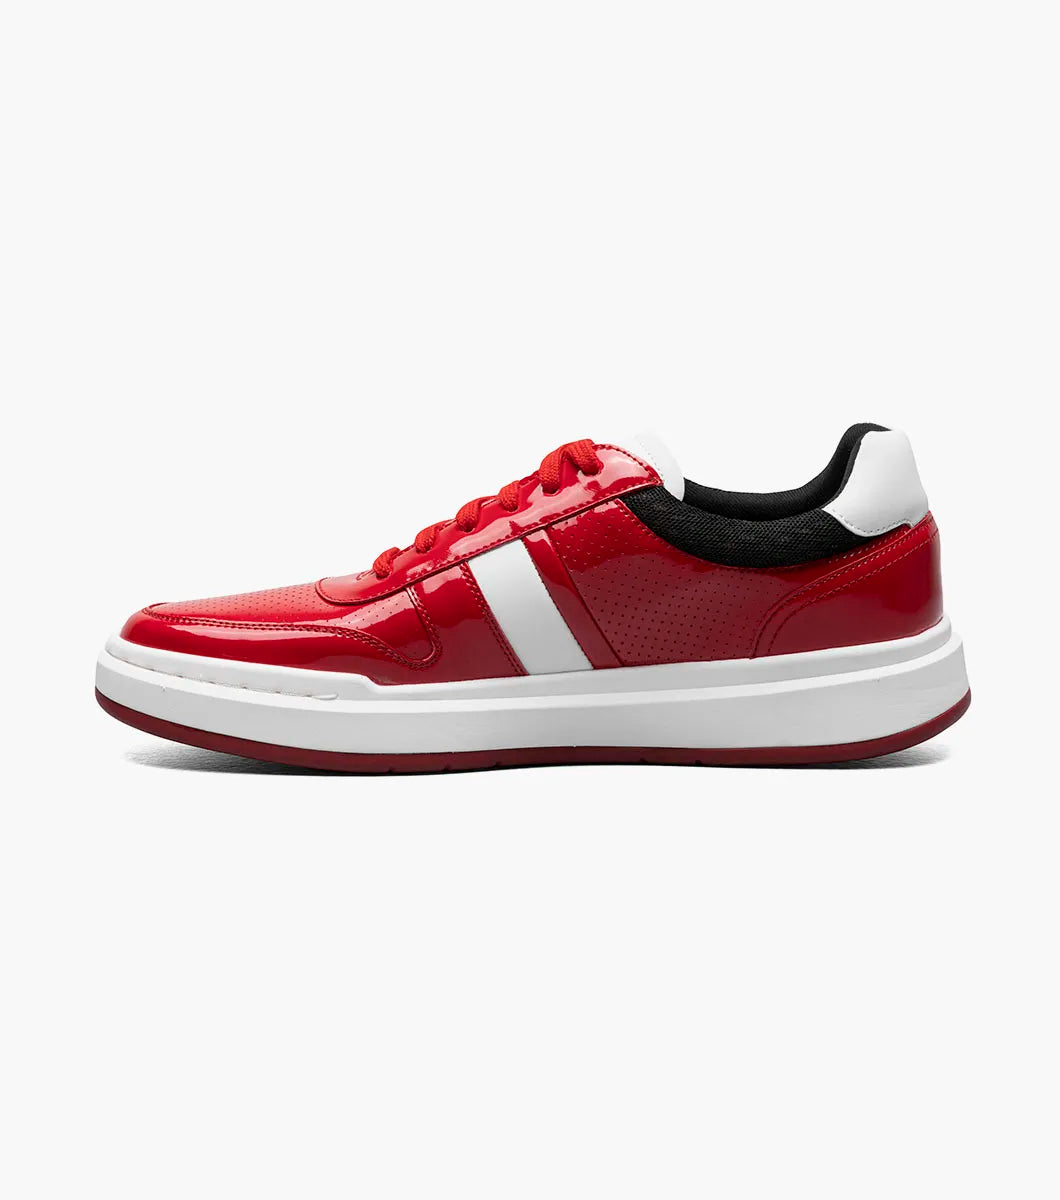 Stacy Adams - CASHTON Moc Toe Lace Up Sneaker - Red - 25531-600